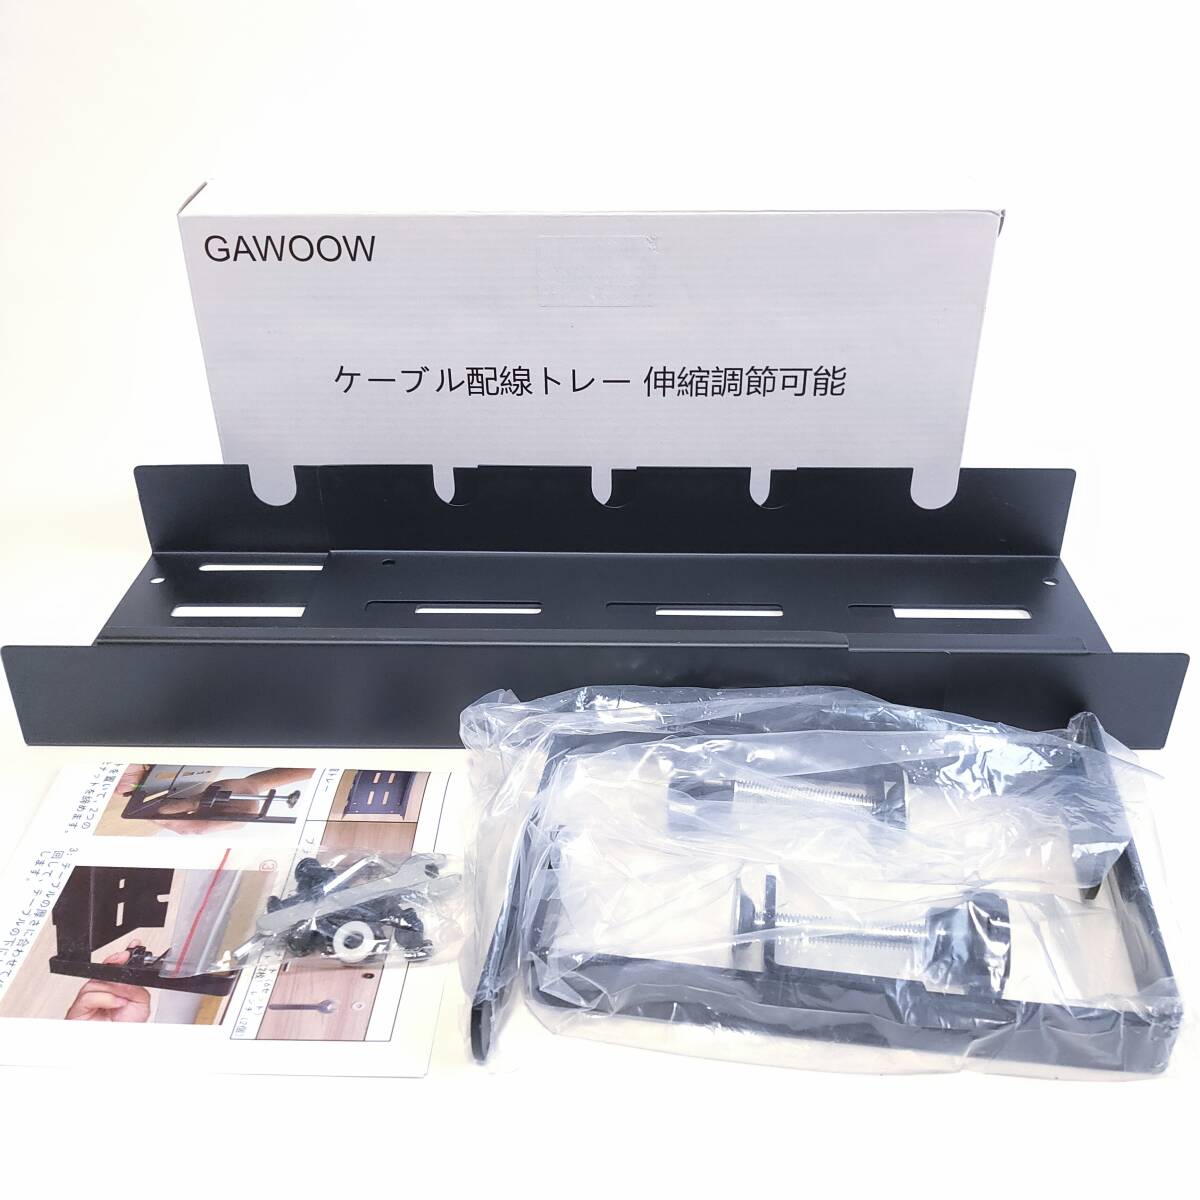 [ one jpy start ]GAWOOW cable tray desk under wiring tray flexible type black [1 jpy ]AKI01_2574